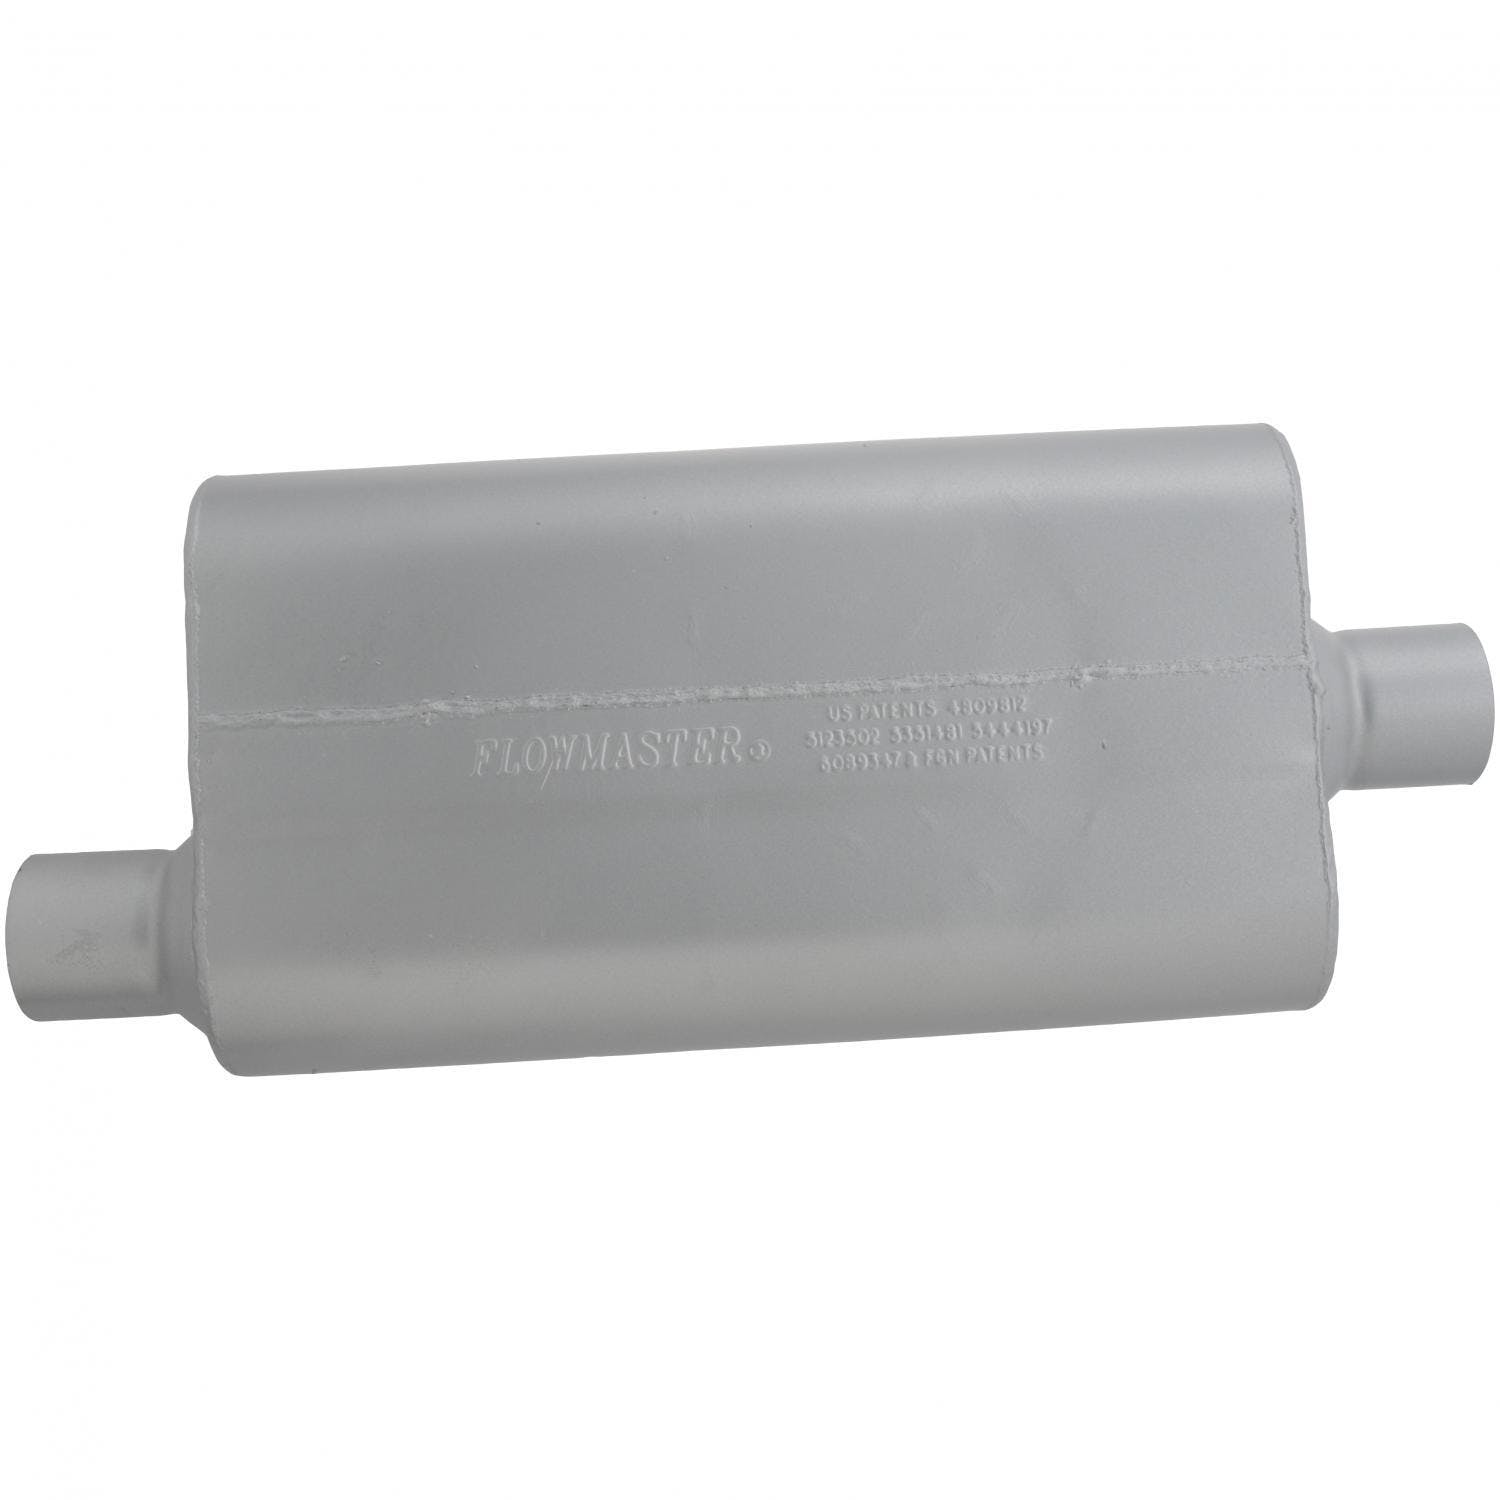 Flowmaster 942551 2.5IN(O)/OUT(C) 50 SERIES DF